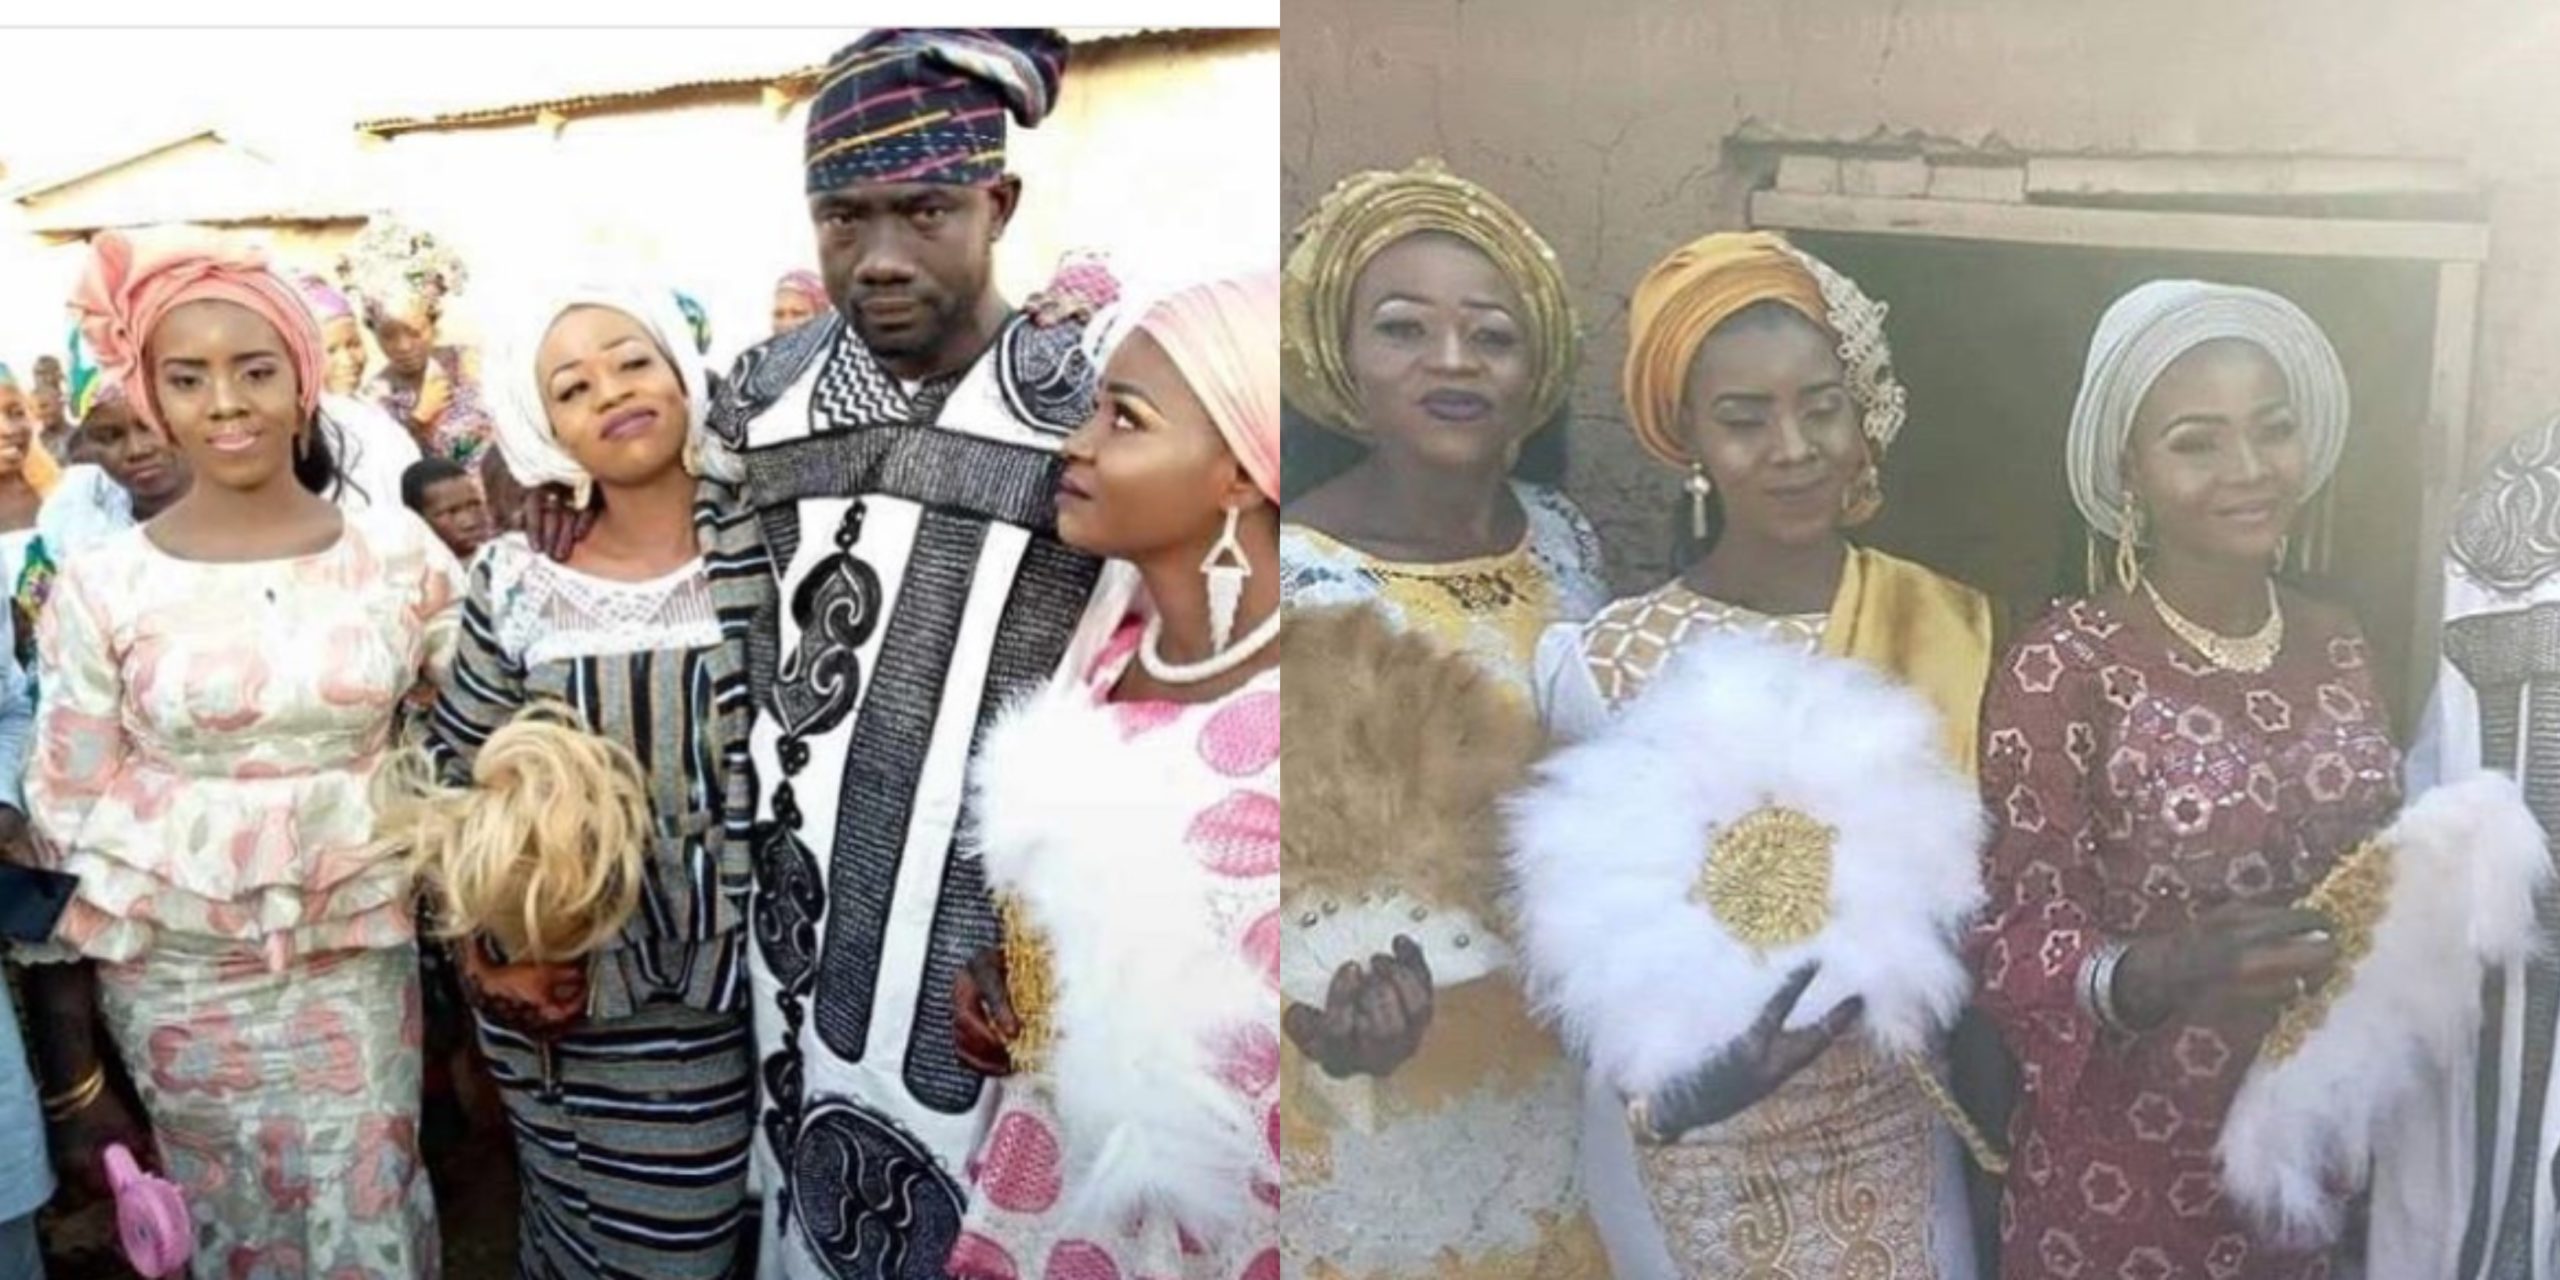 Baba For The Girls! Wedding photos of the man who married three wives on same day